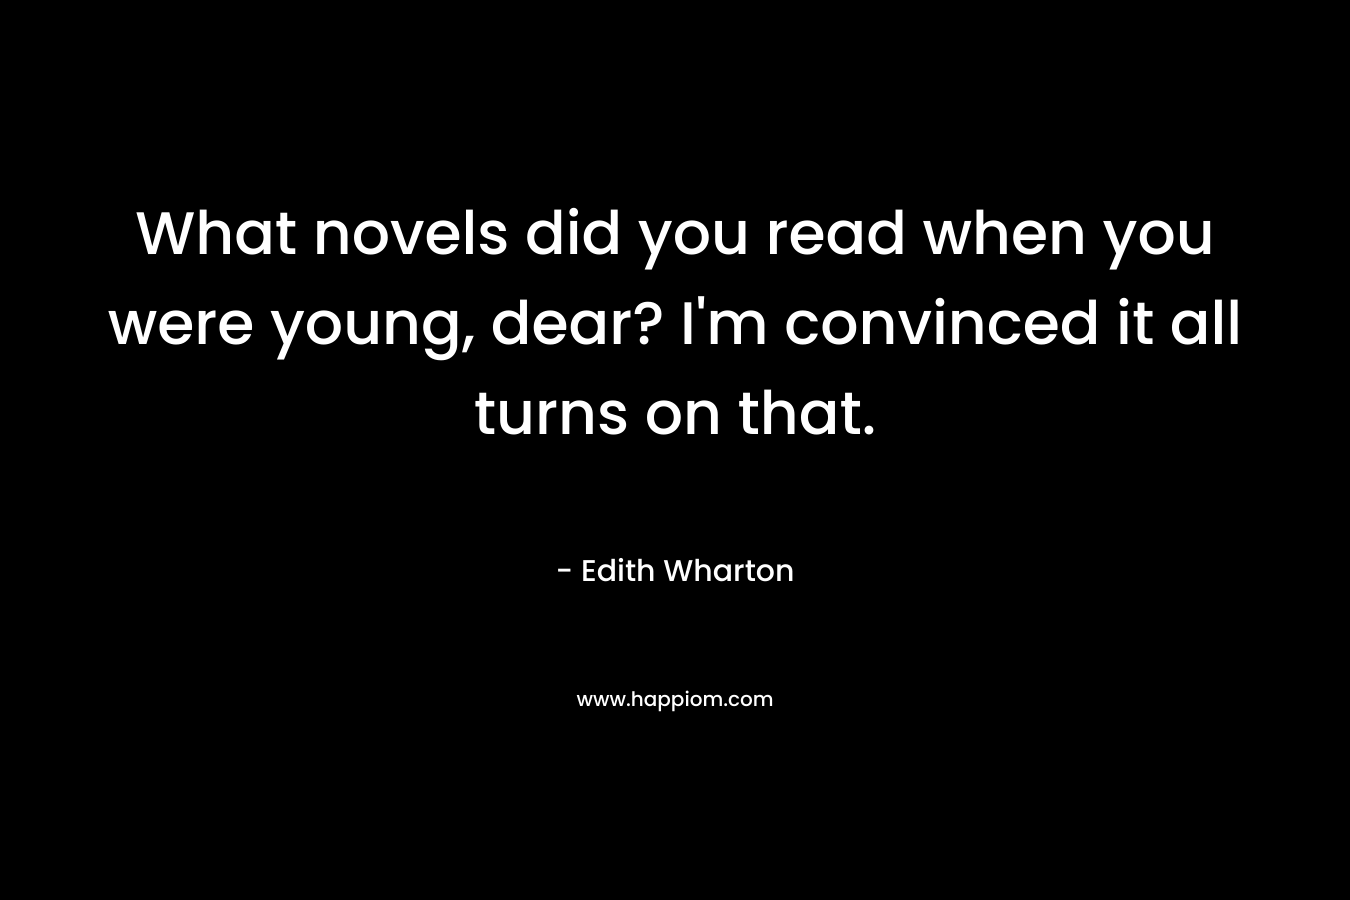 What novels did you read when you were young, dear? I'm convinced it all turns on that.